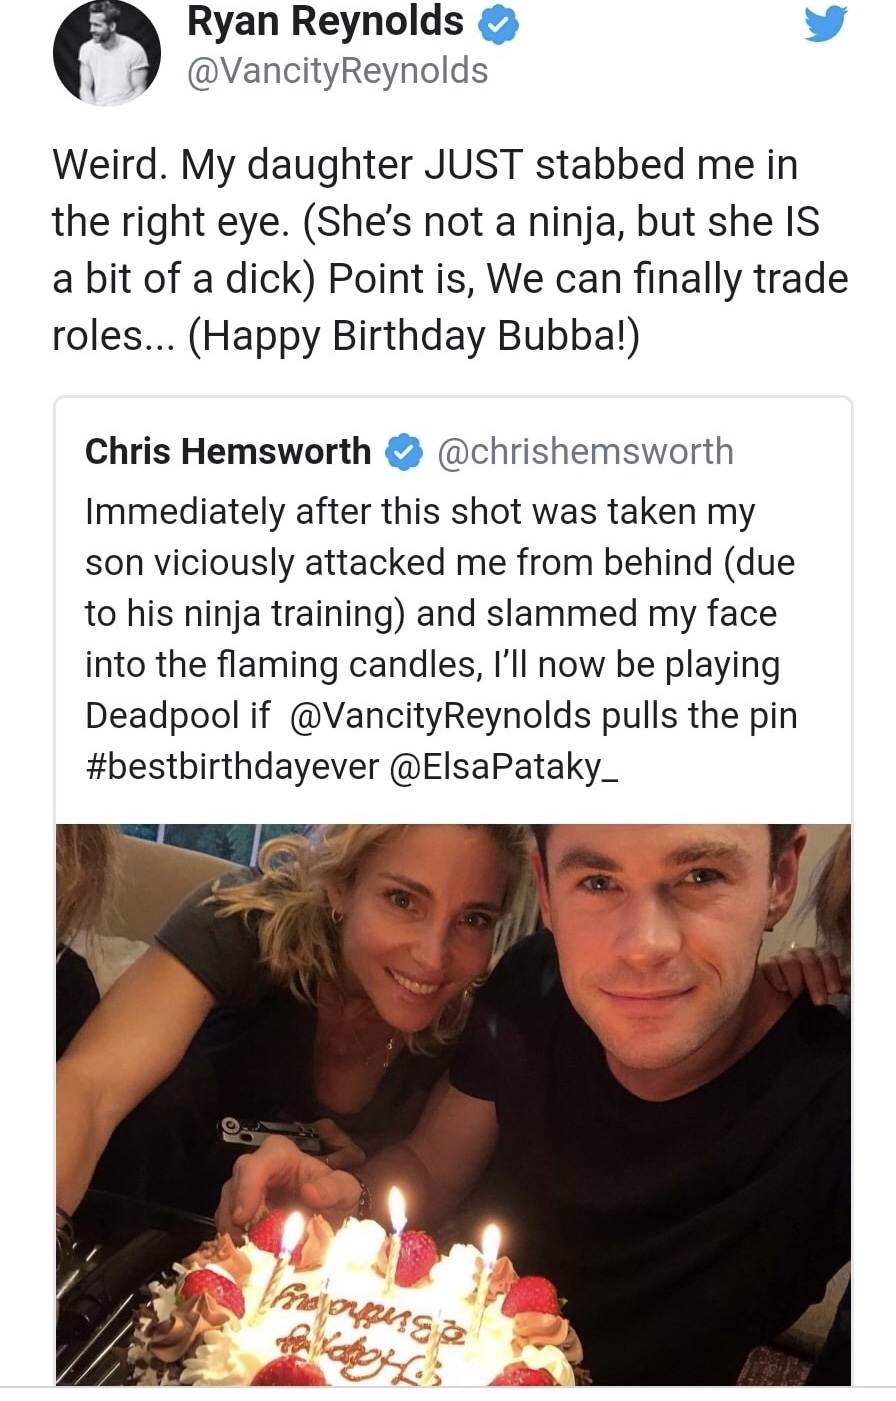 memes - chris hemsworth ryan reynolds tweet - Ryan Reynolds Weird. My daughter Just stabbed me in the right eye. She's not a ninja, but she Is a bit of a dick Point is, We can finally trade roles... Happy Birthday Bubba! Chris Hemsworth Immediately after 